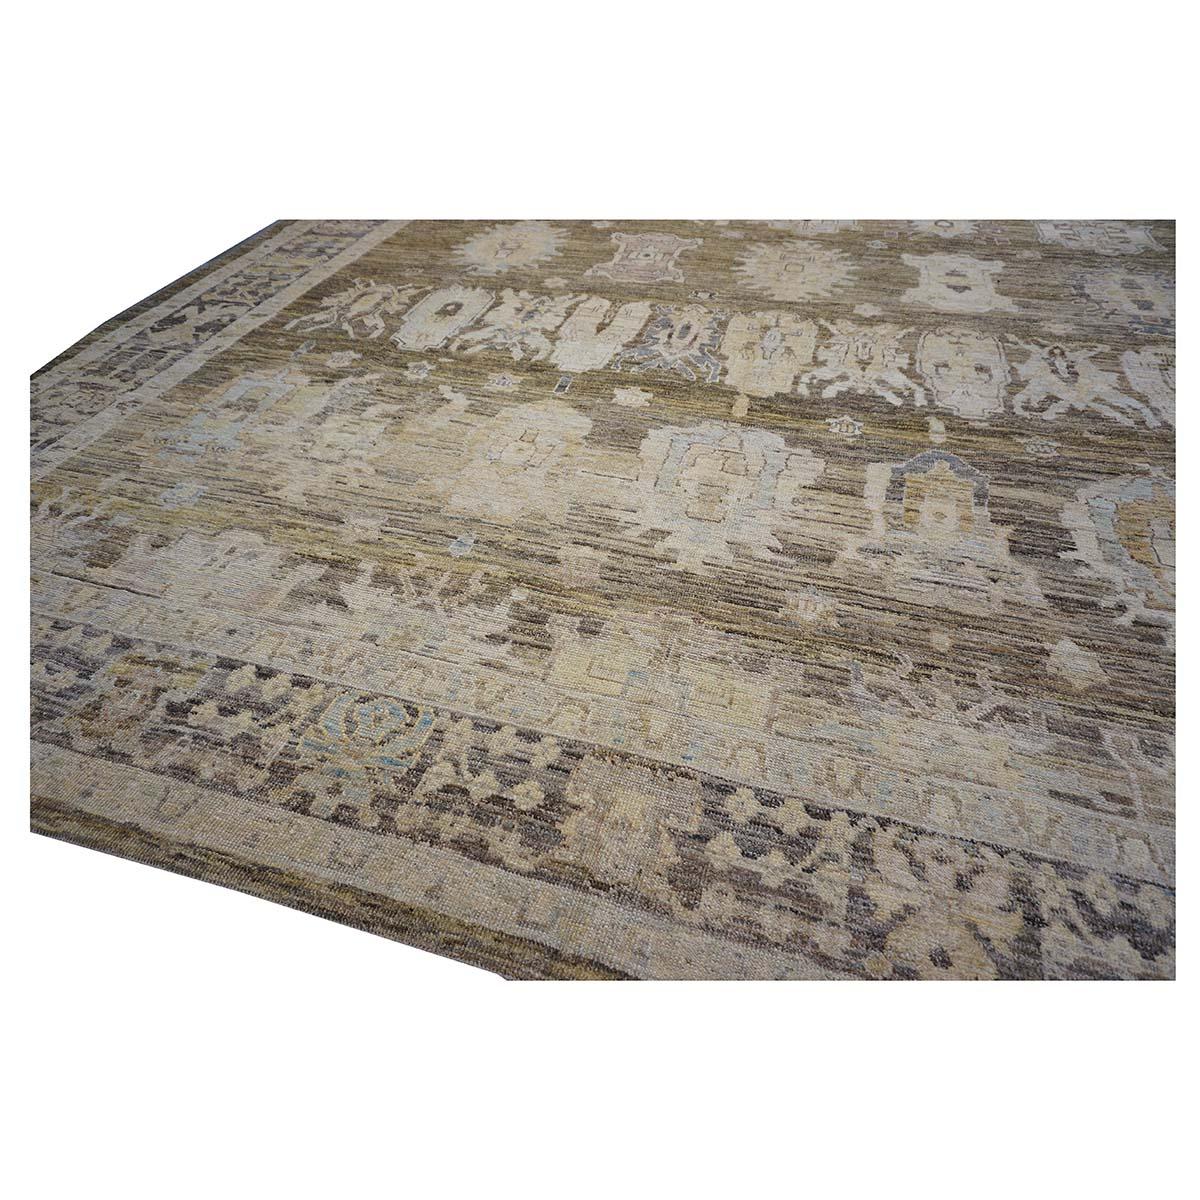 21st Century Turkish Oushak 15x23 Brown, Charcoal & Ivory Handmade Oversized Rug In Good Condition For Sale In Houston, TX